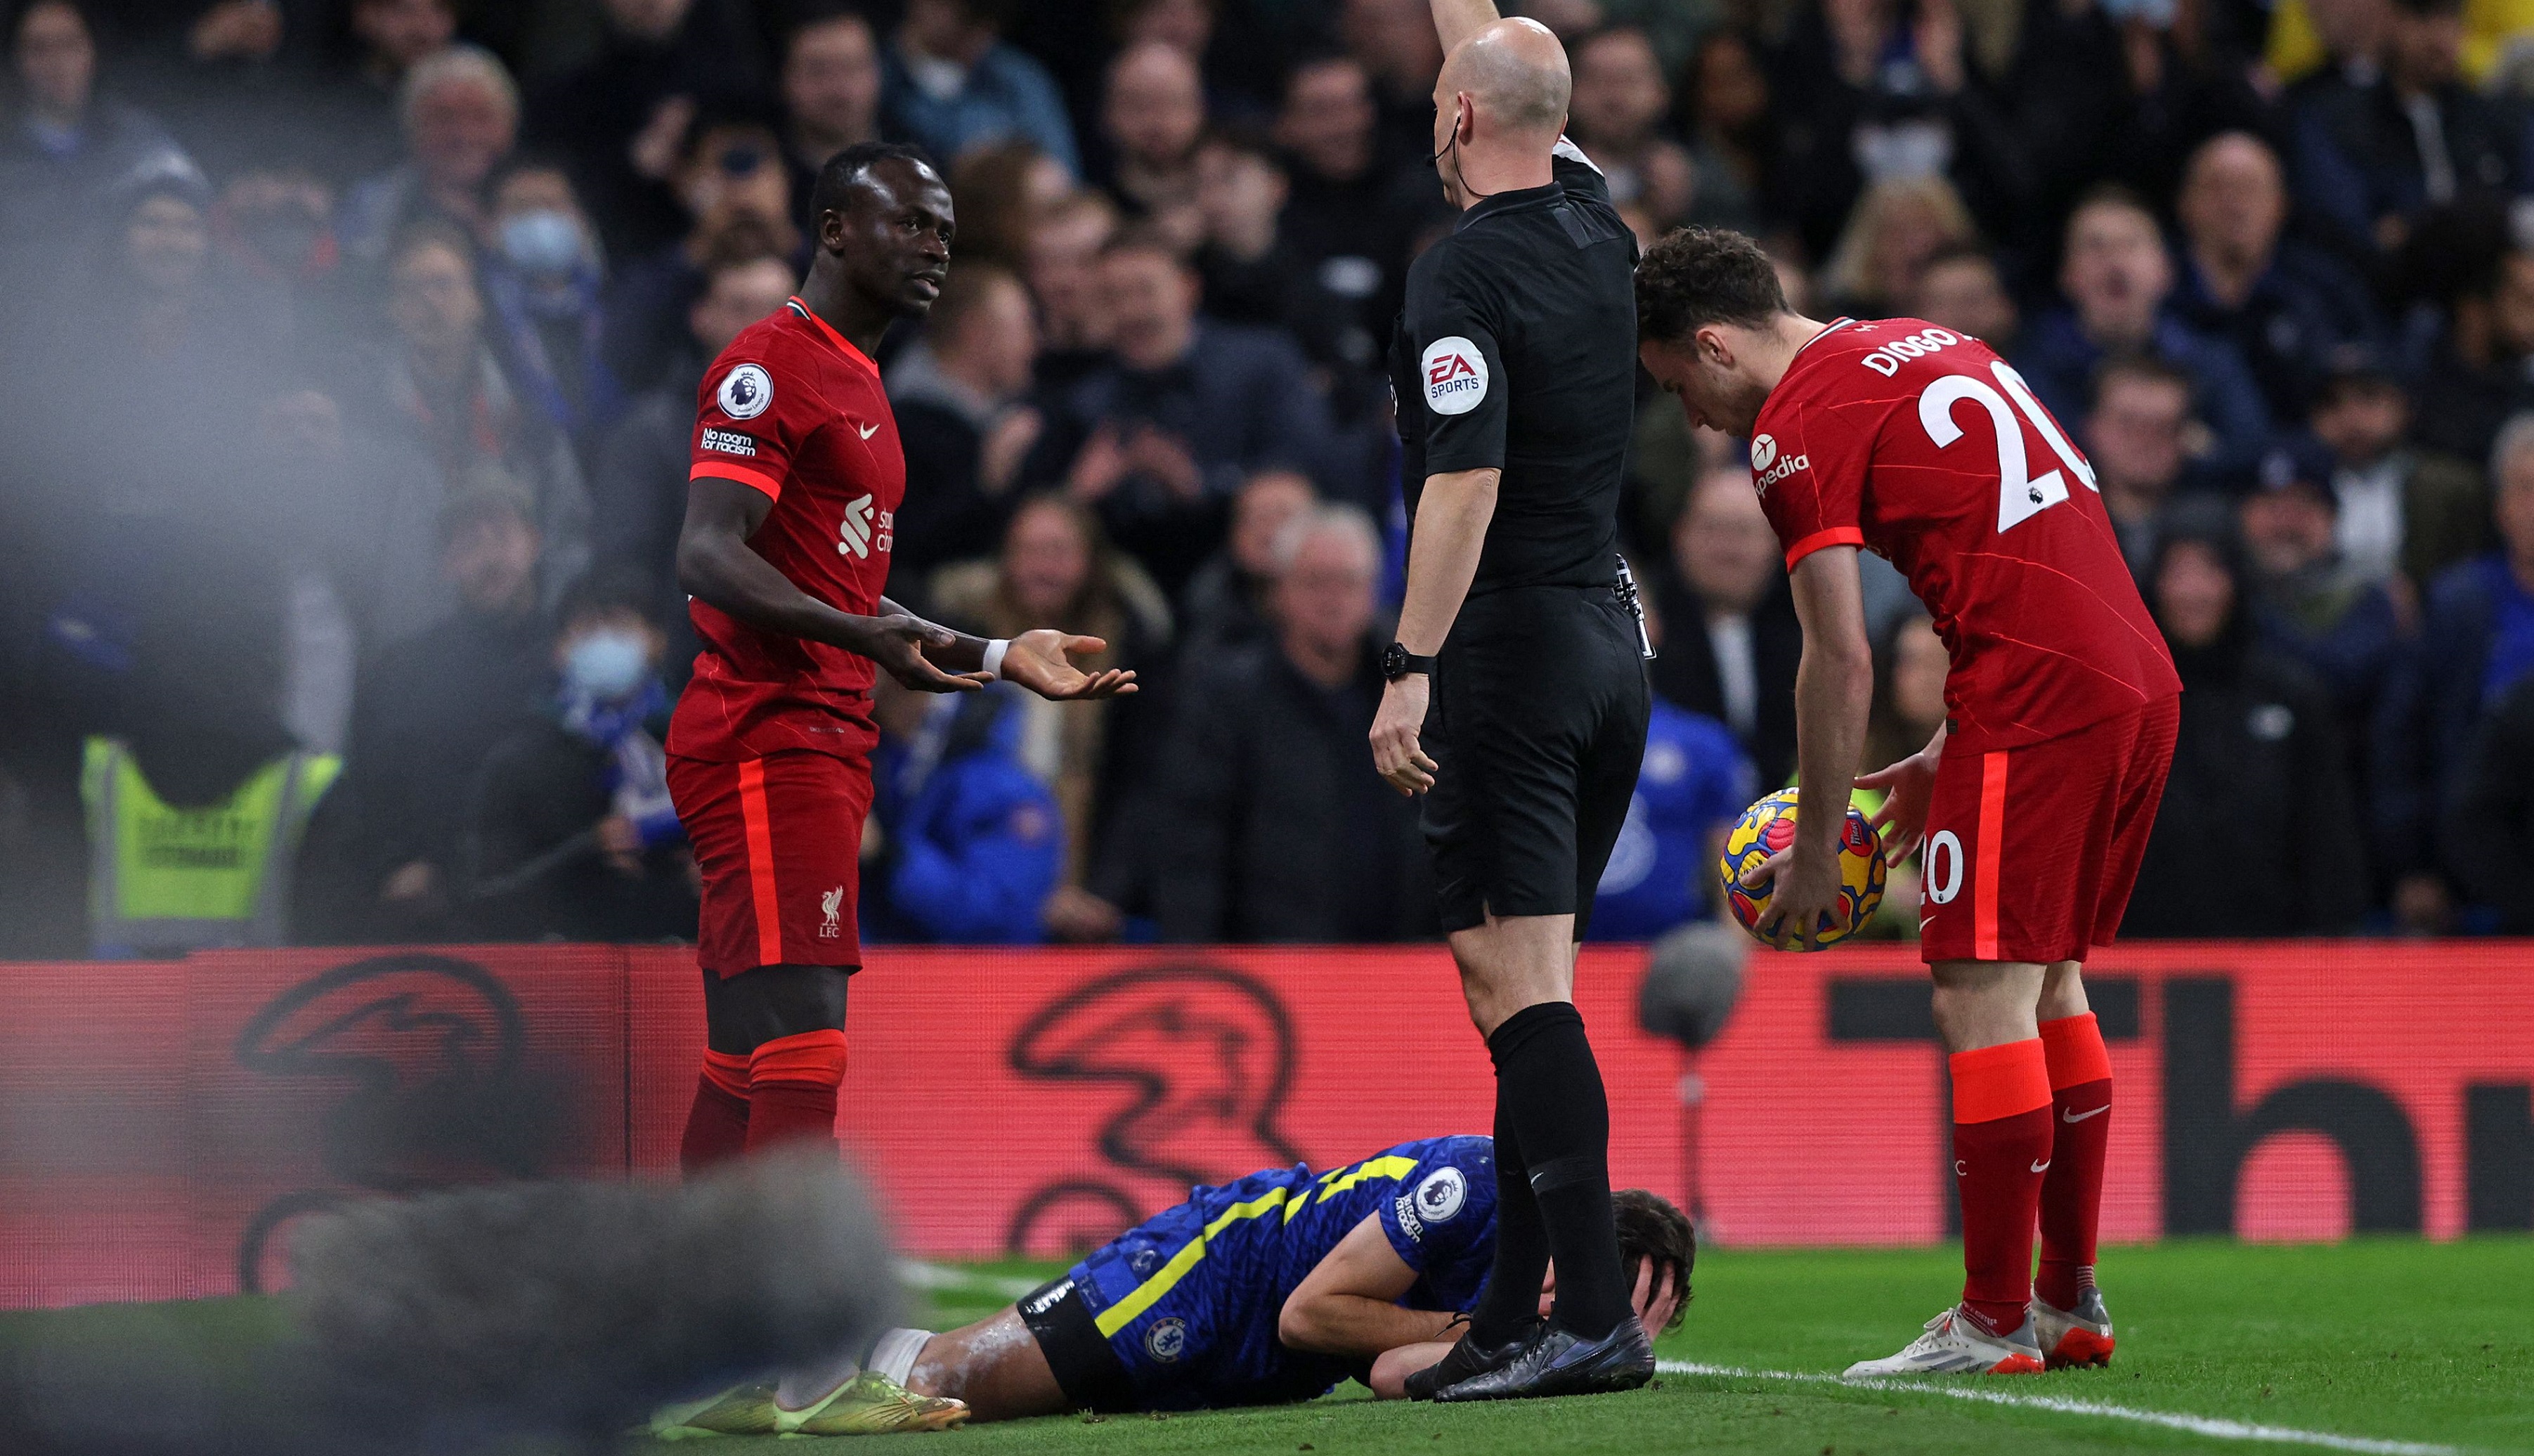 Sadio Mane ‘stunned’ pundit during Chelsea clash in moment that ‘endangered’ his opponent